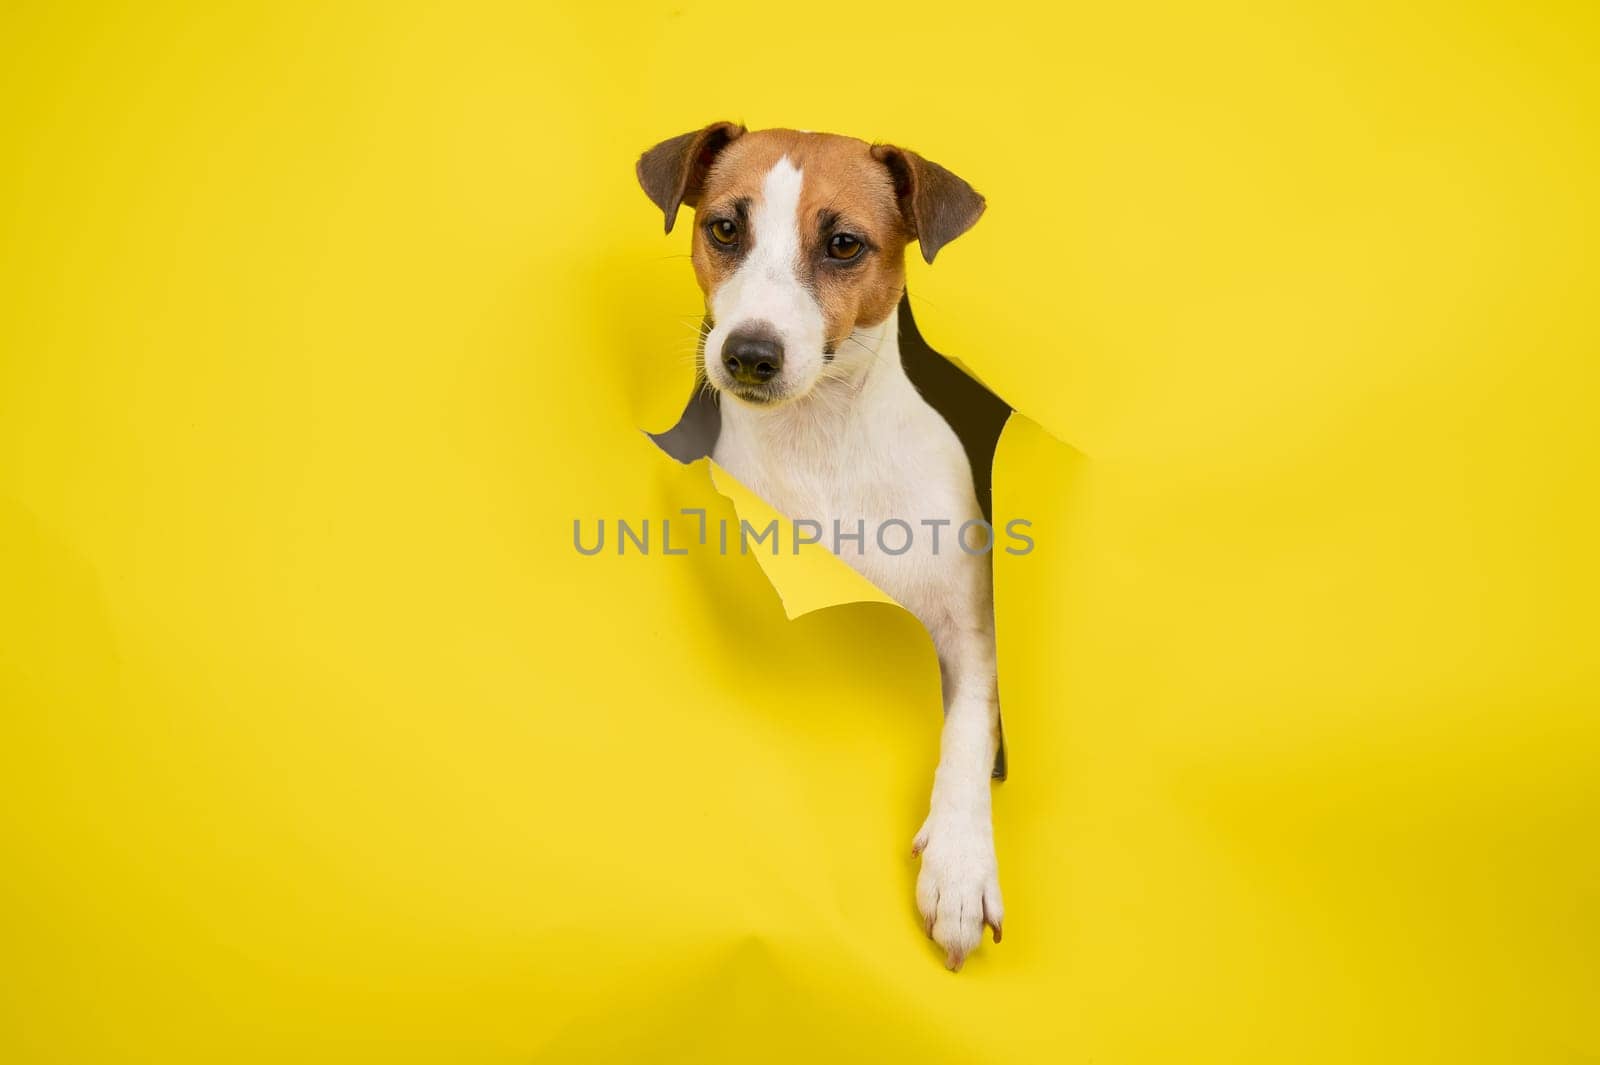 Cute Jack Russell Terrier dog tearing up yellow cardboard background